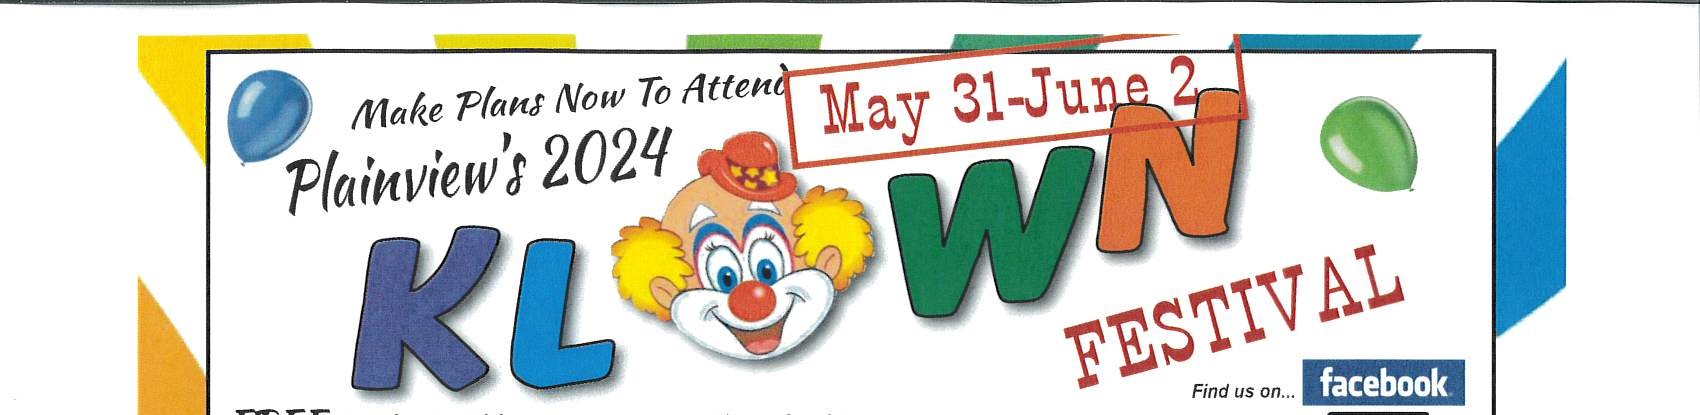 Klown Days - May 31, June 1-2, 2024